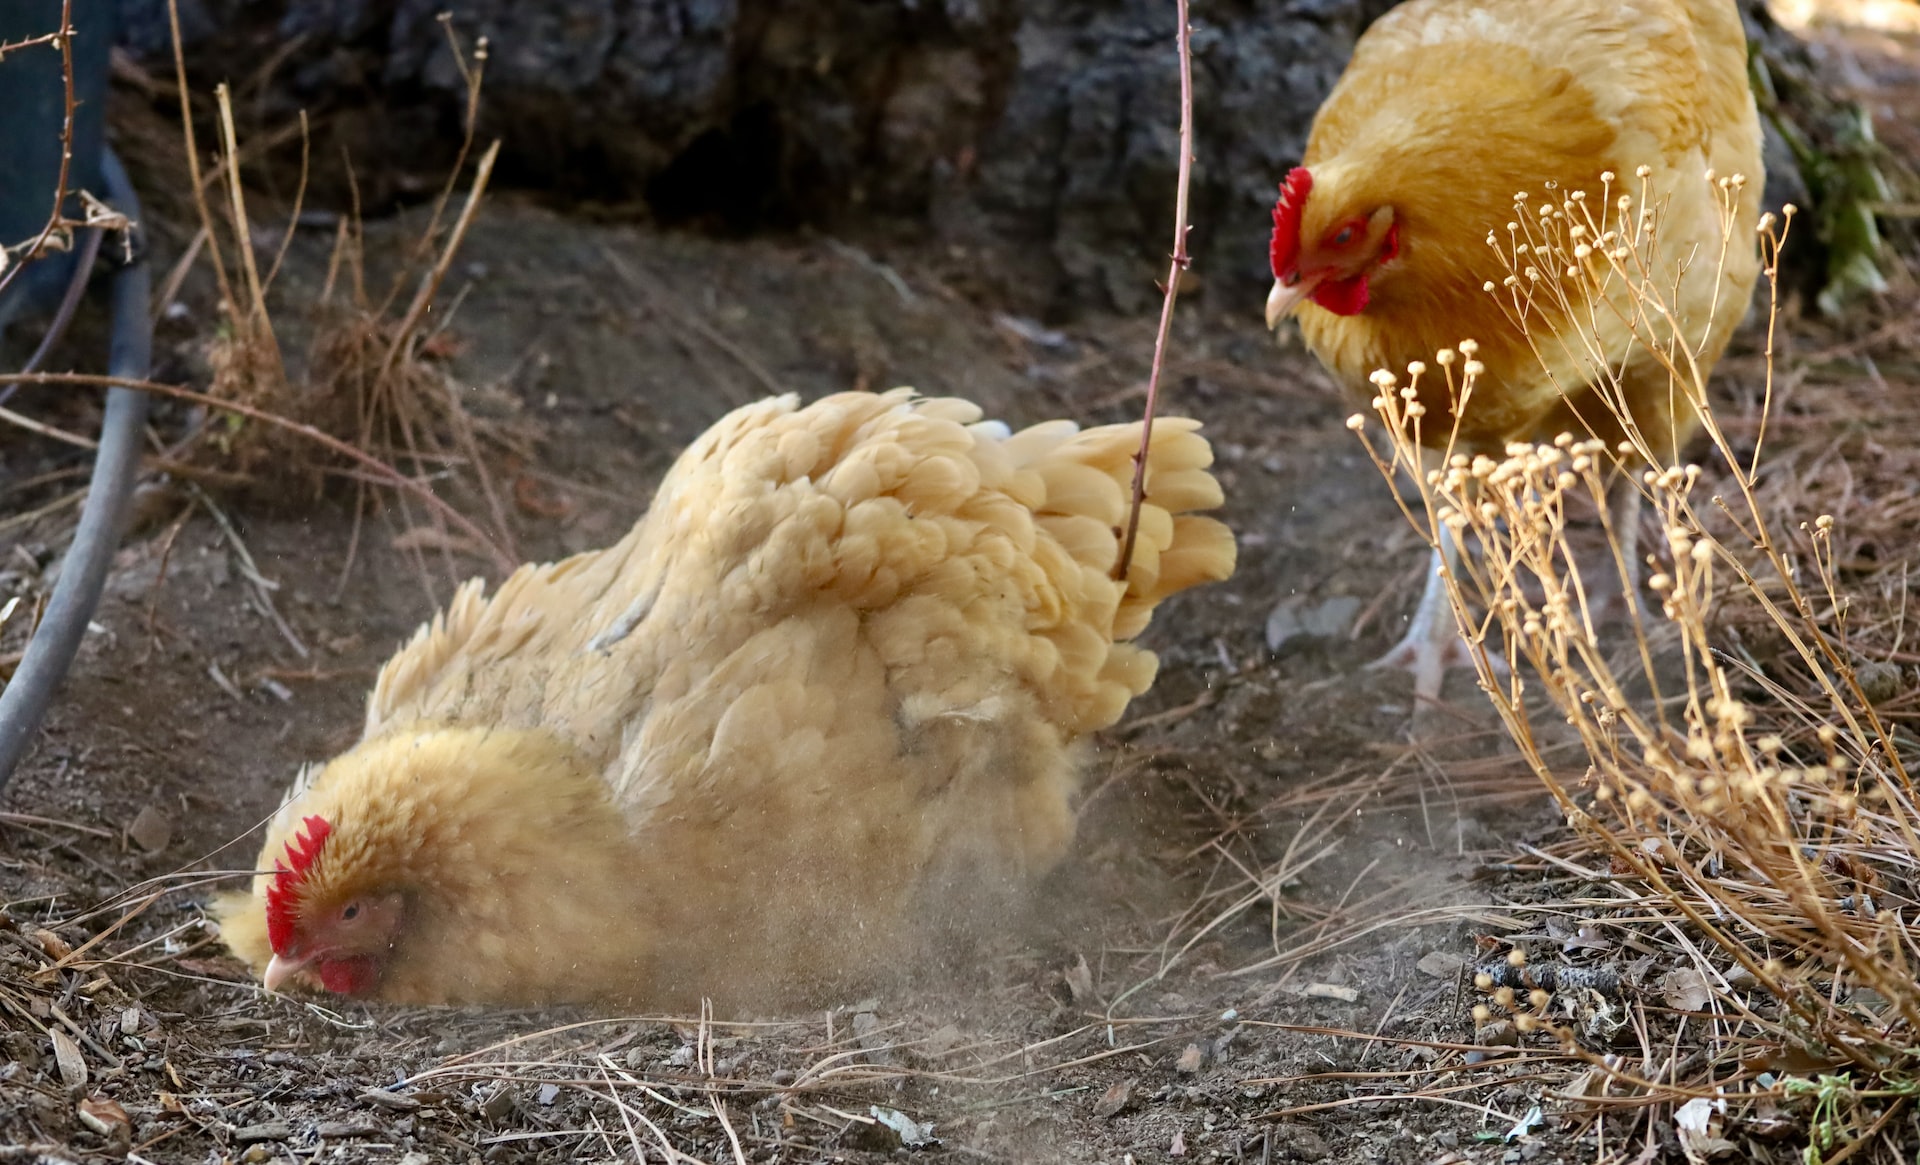 How To Know If Chickens Are Sick? – Signs Of Stress And Illness